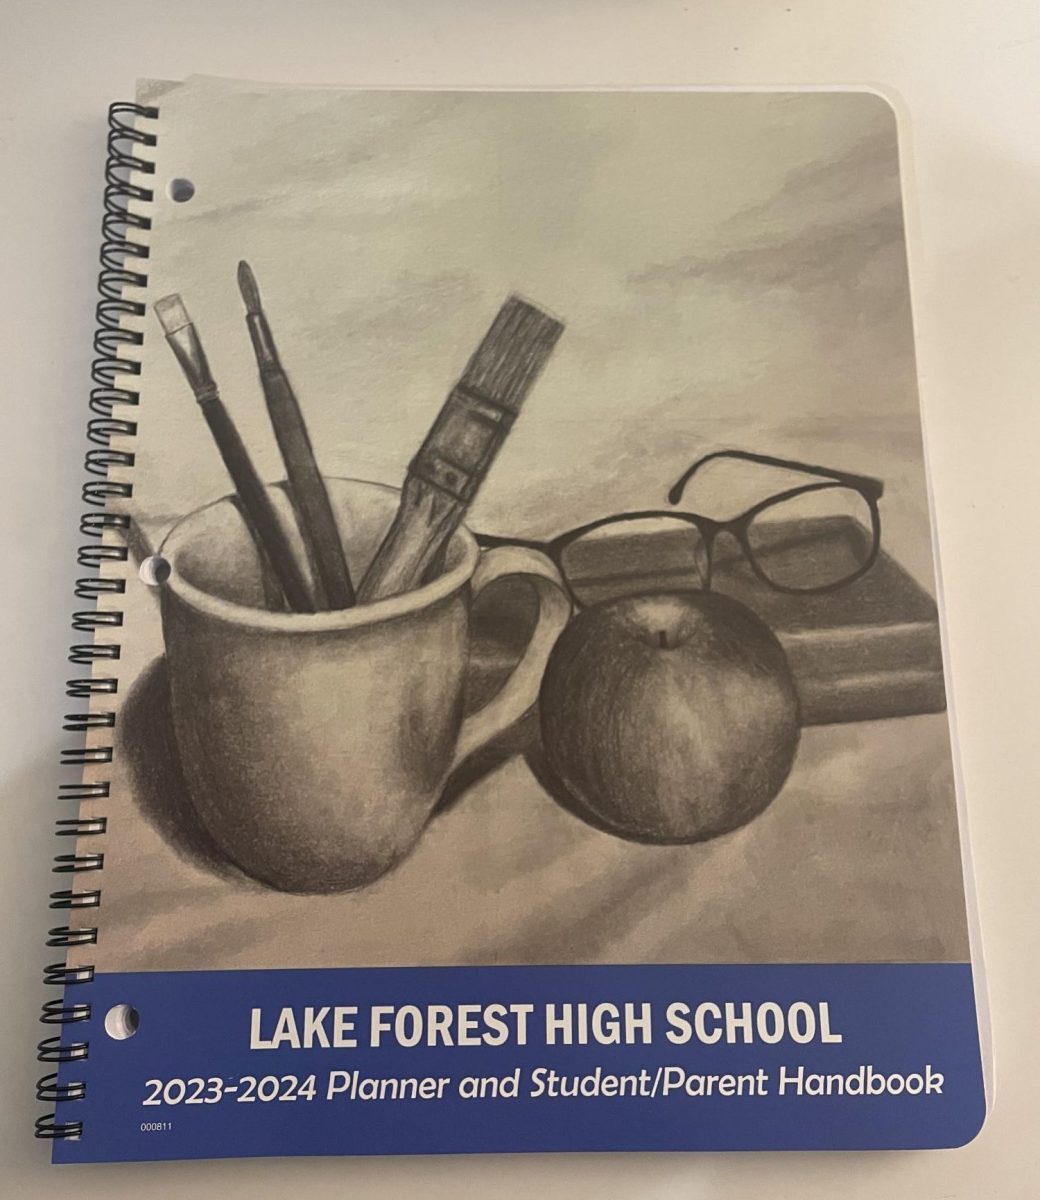 LFHS provides free planners to every student in hopes of increasing personal organizational levels. Photo courtesy of Ariel Ellison.